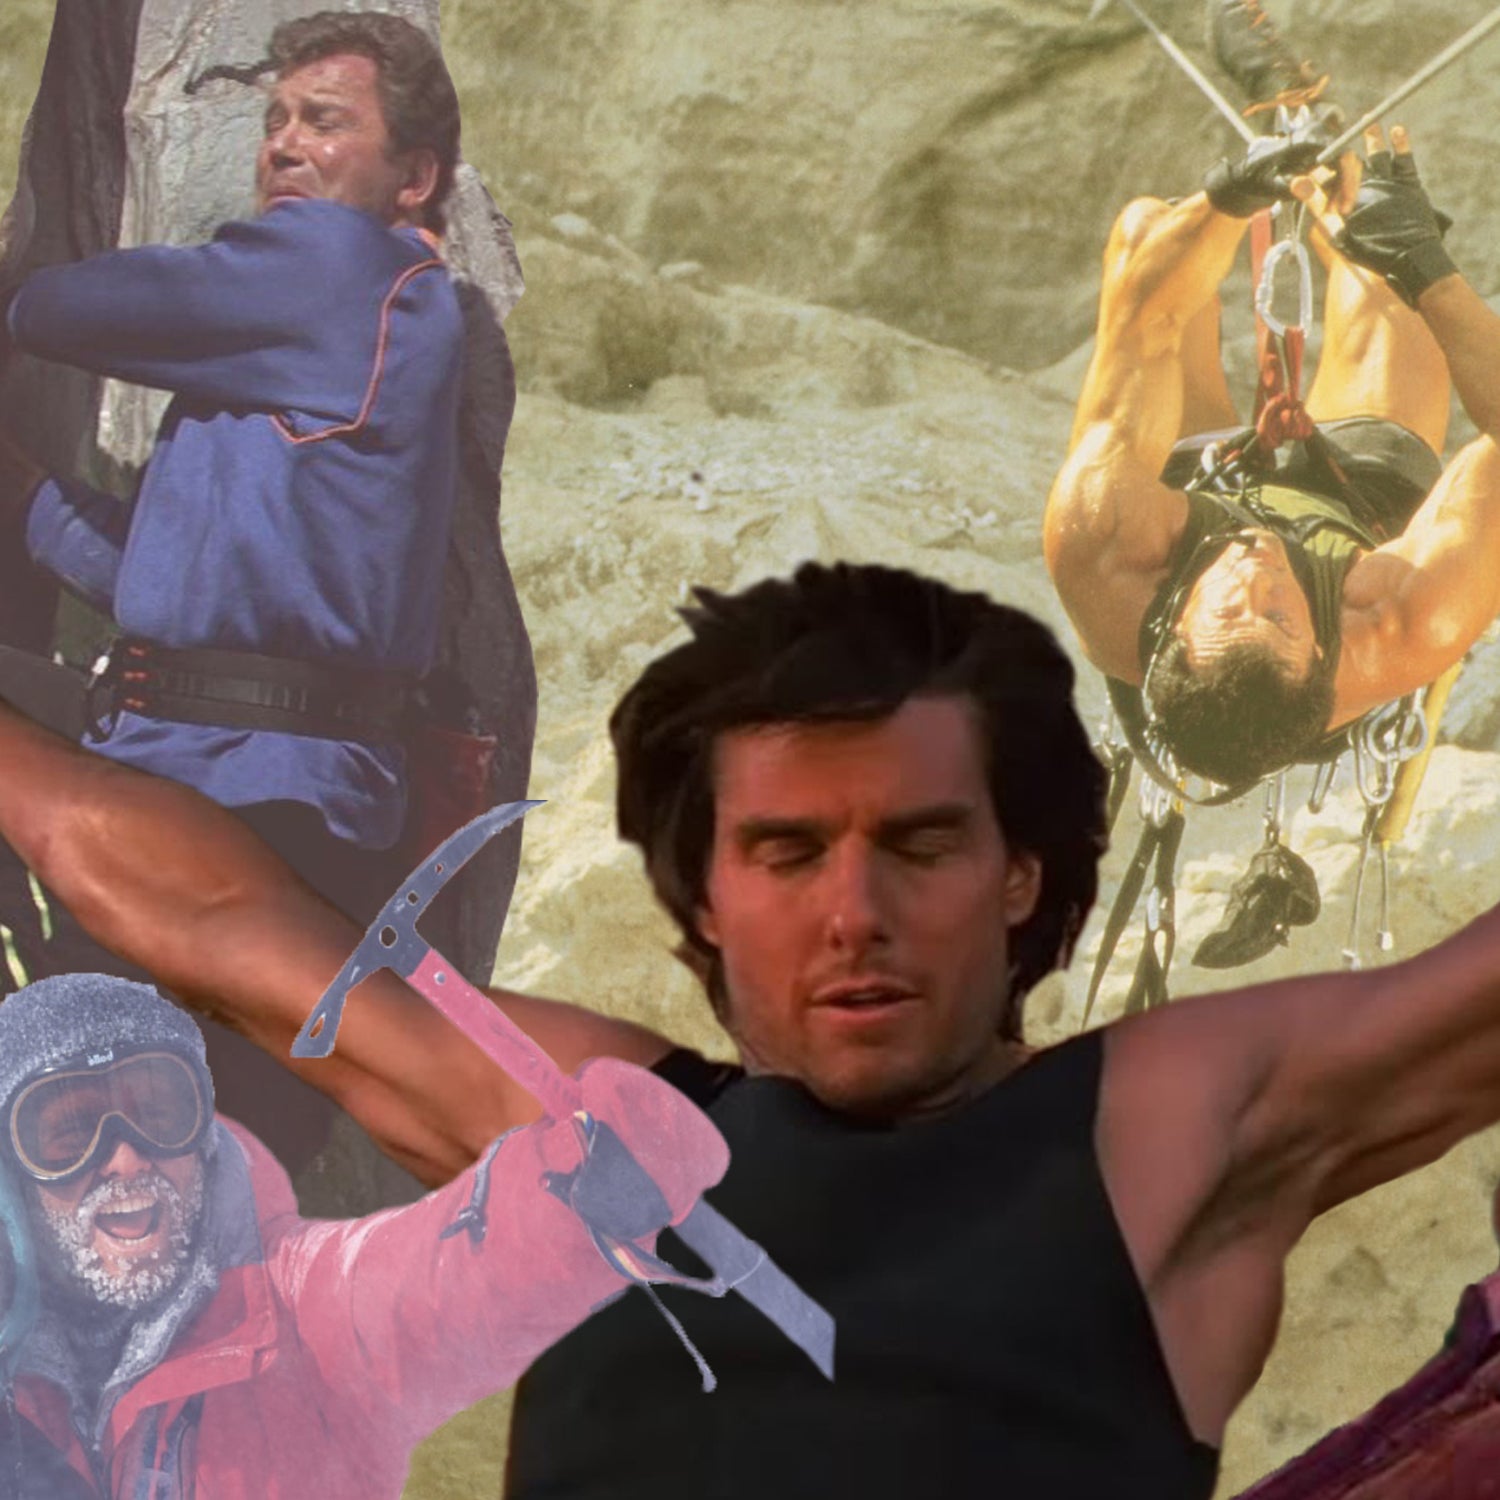 A Definitive Ranking of Climbing Scenes in Movies